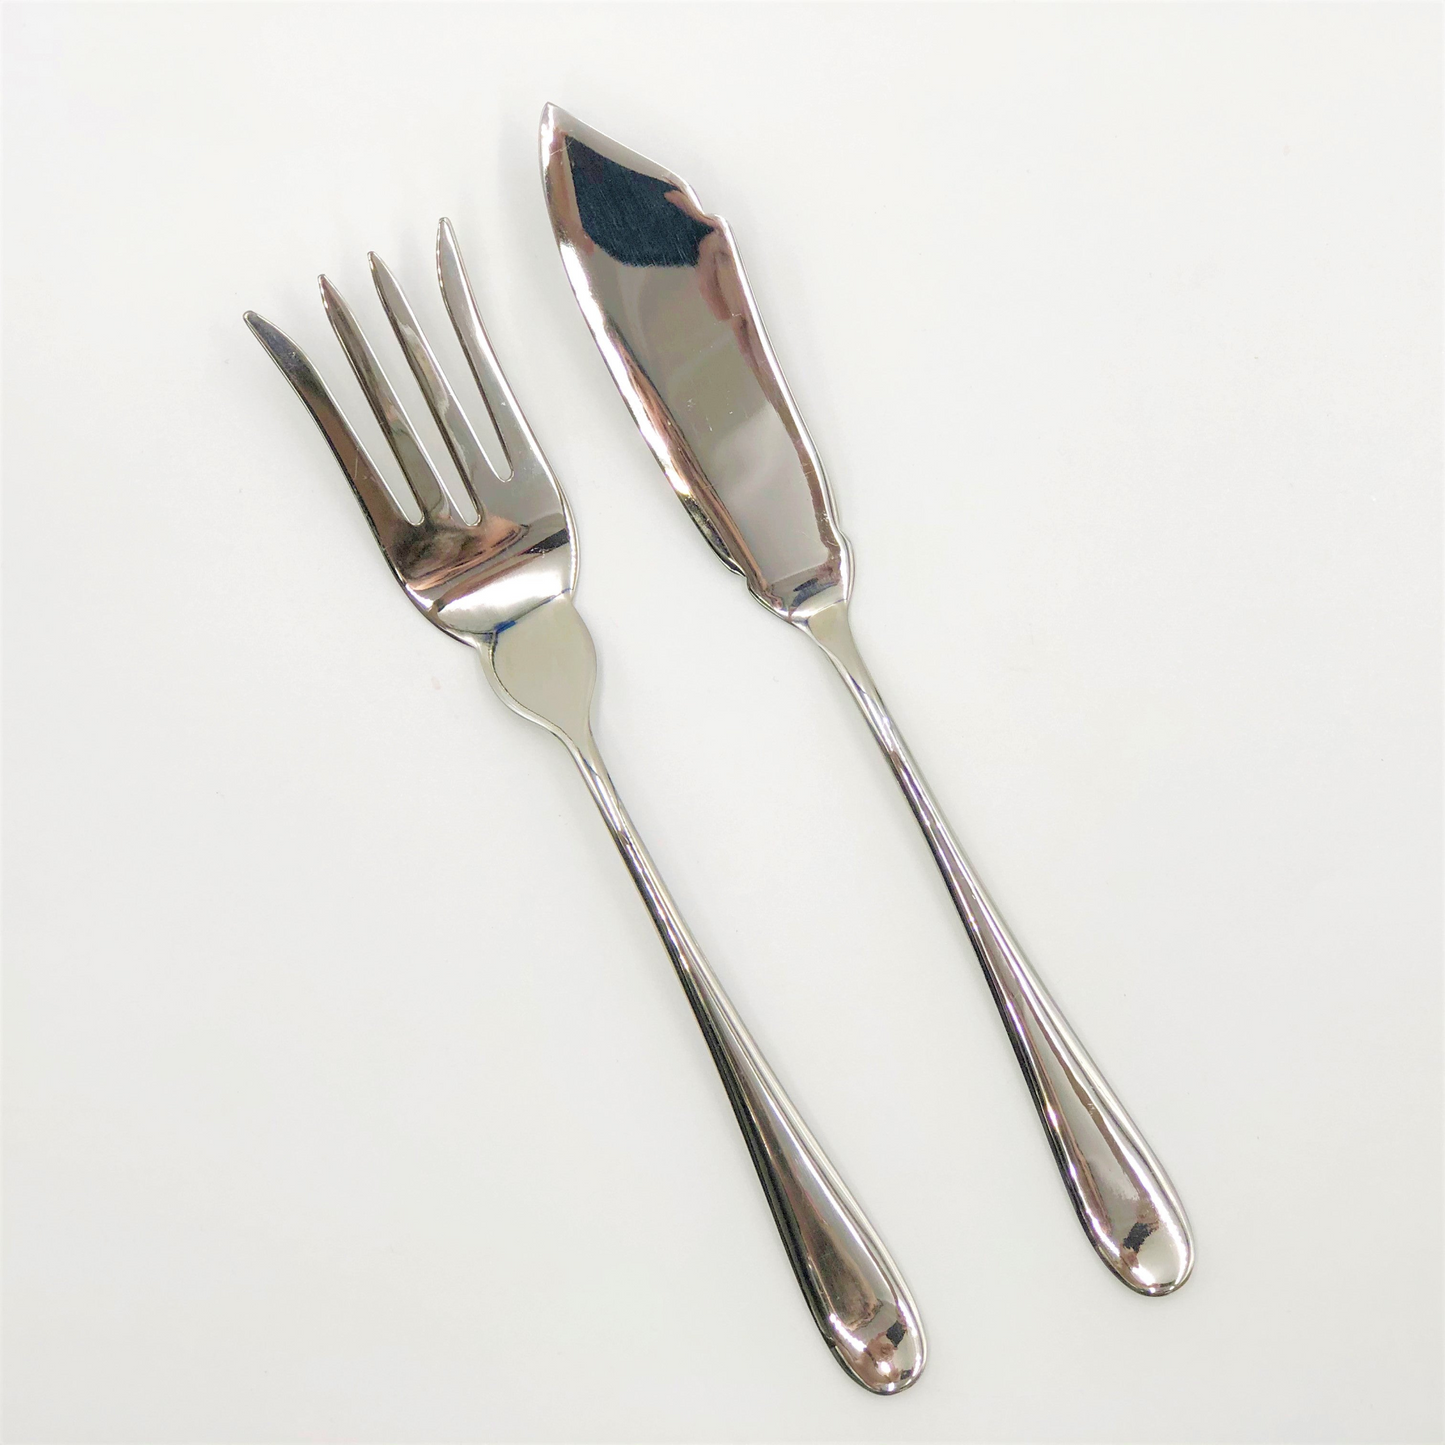 Stainless Steel Fish Serving Knife And Serving Fork Two (2) Piece Serving Set Great For Entertaining WL-555053